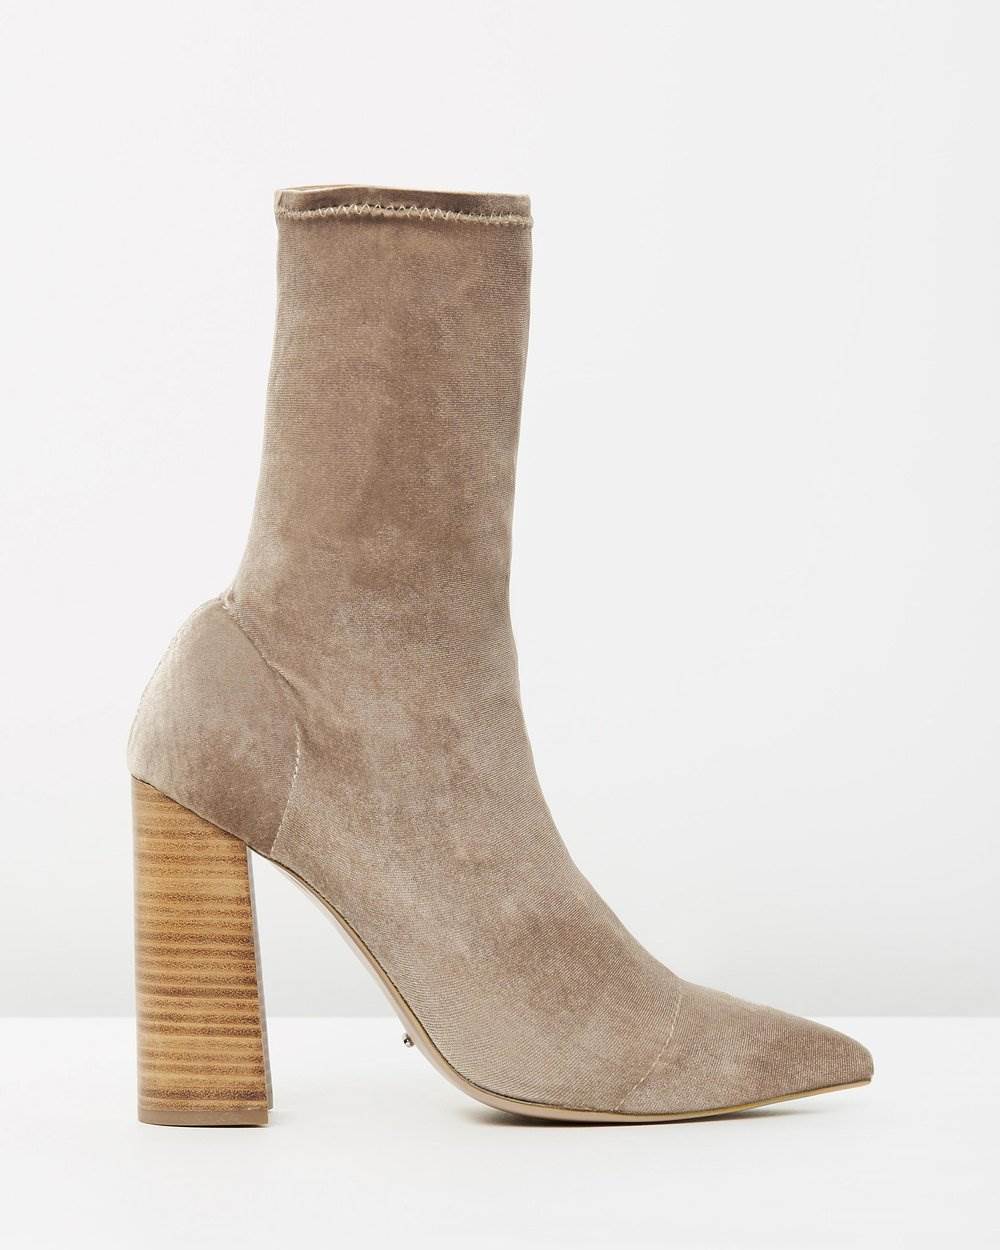 THE BEIGE SOCK: Tony Bianco boots, $235 from the Iconic